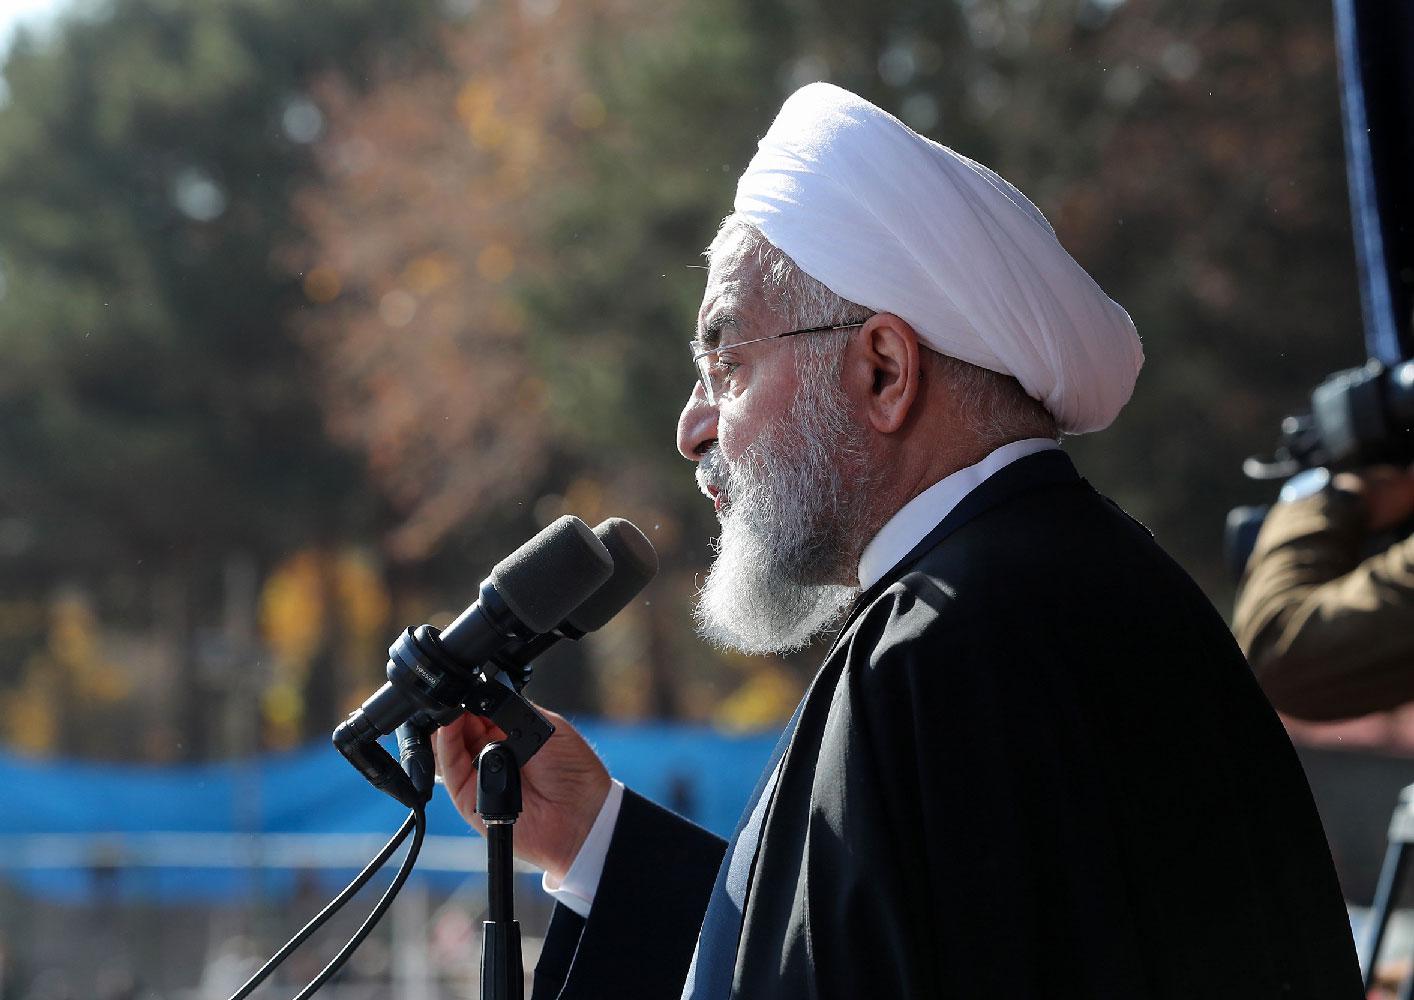 Iran's President Hassan Rouhani speaking during a rally in the city of Shahrud.